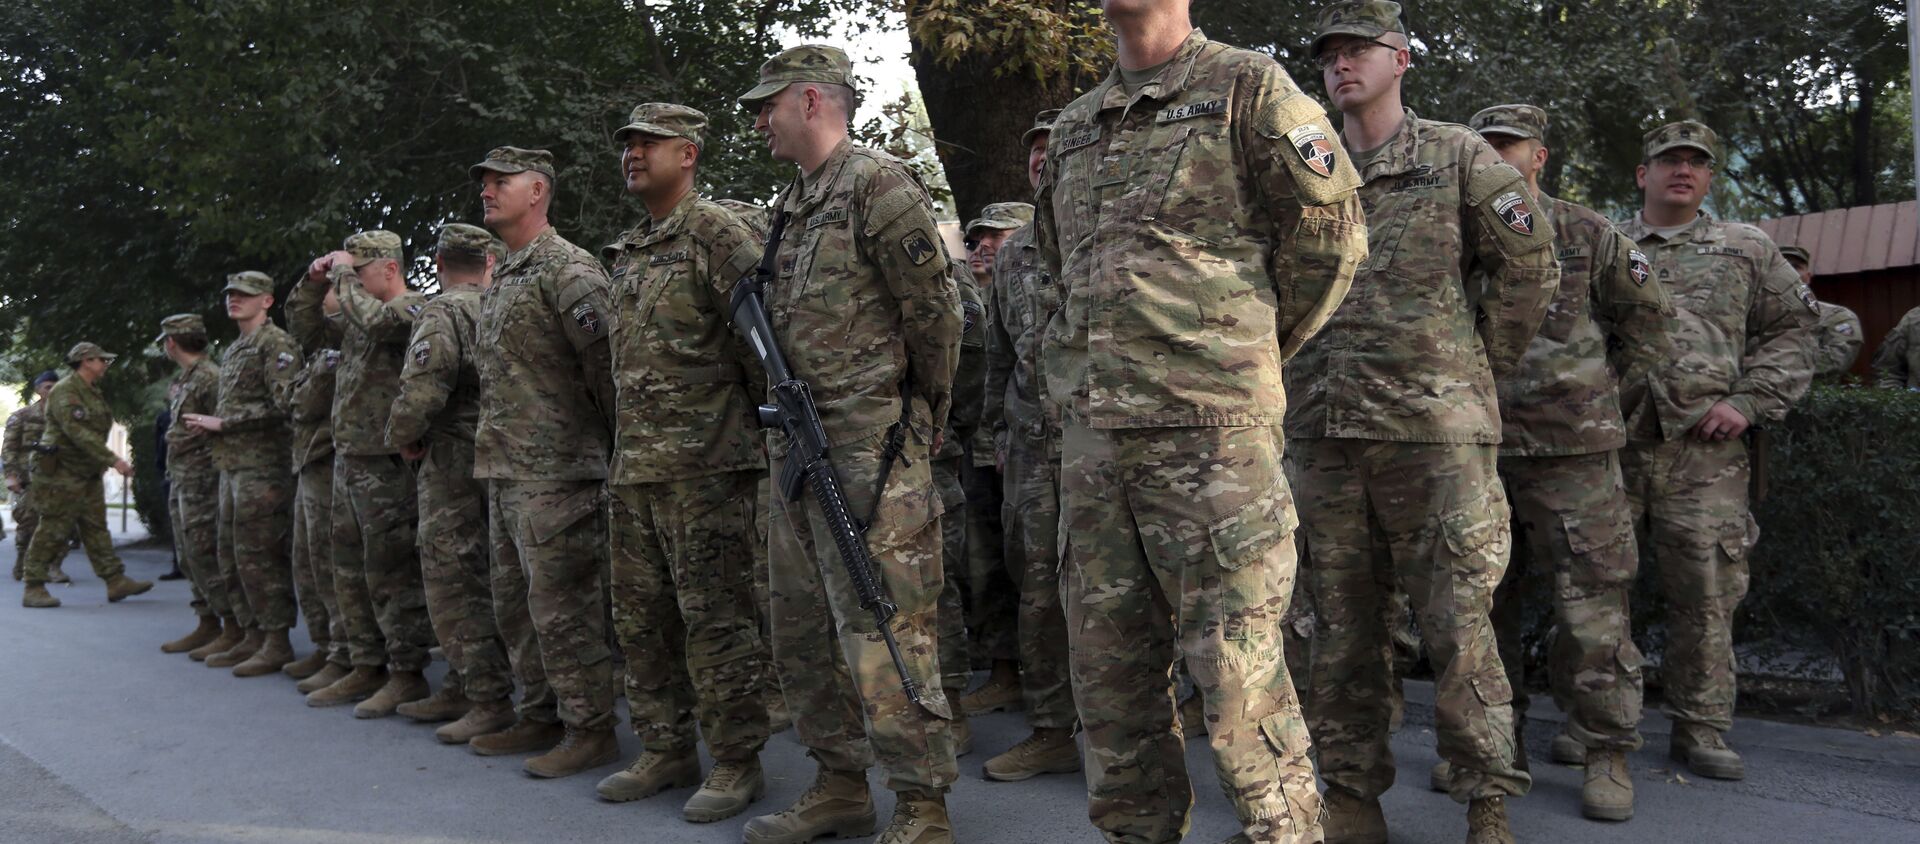 US and NATO soldiers take part in a ceremony to commemorate the Sept. 11, 2001, attack on the World Trade Center in New York, in Resolute Support 'Green Zone' headquarters of Kabul, Afghanistan, Monday, Sept. 11, 2017 - Sputnik International, 1920, 14.04.2021